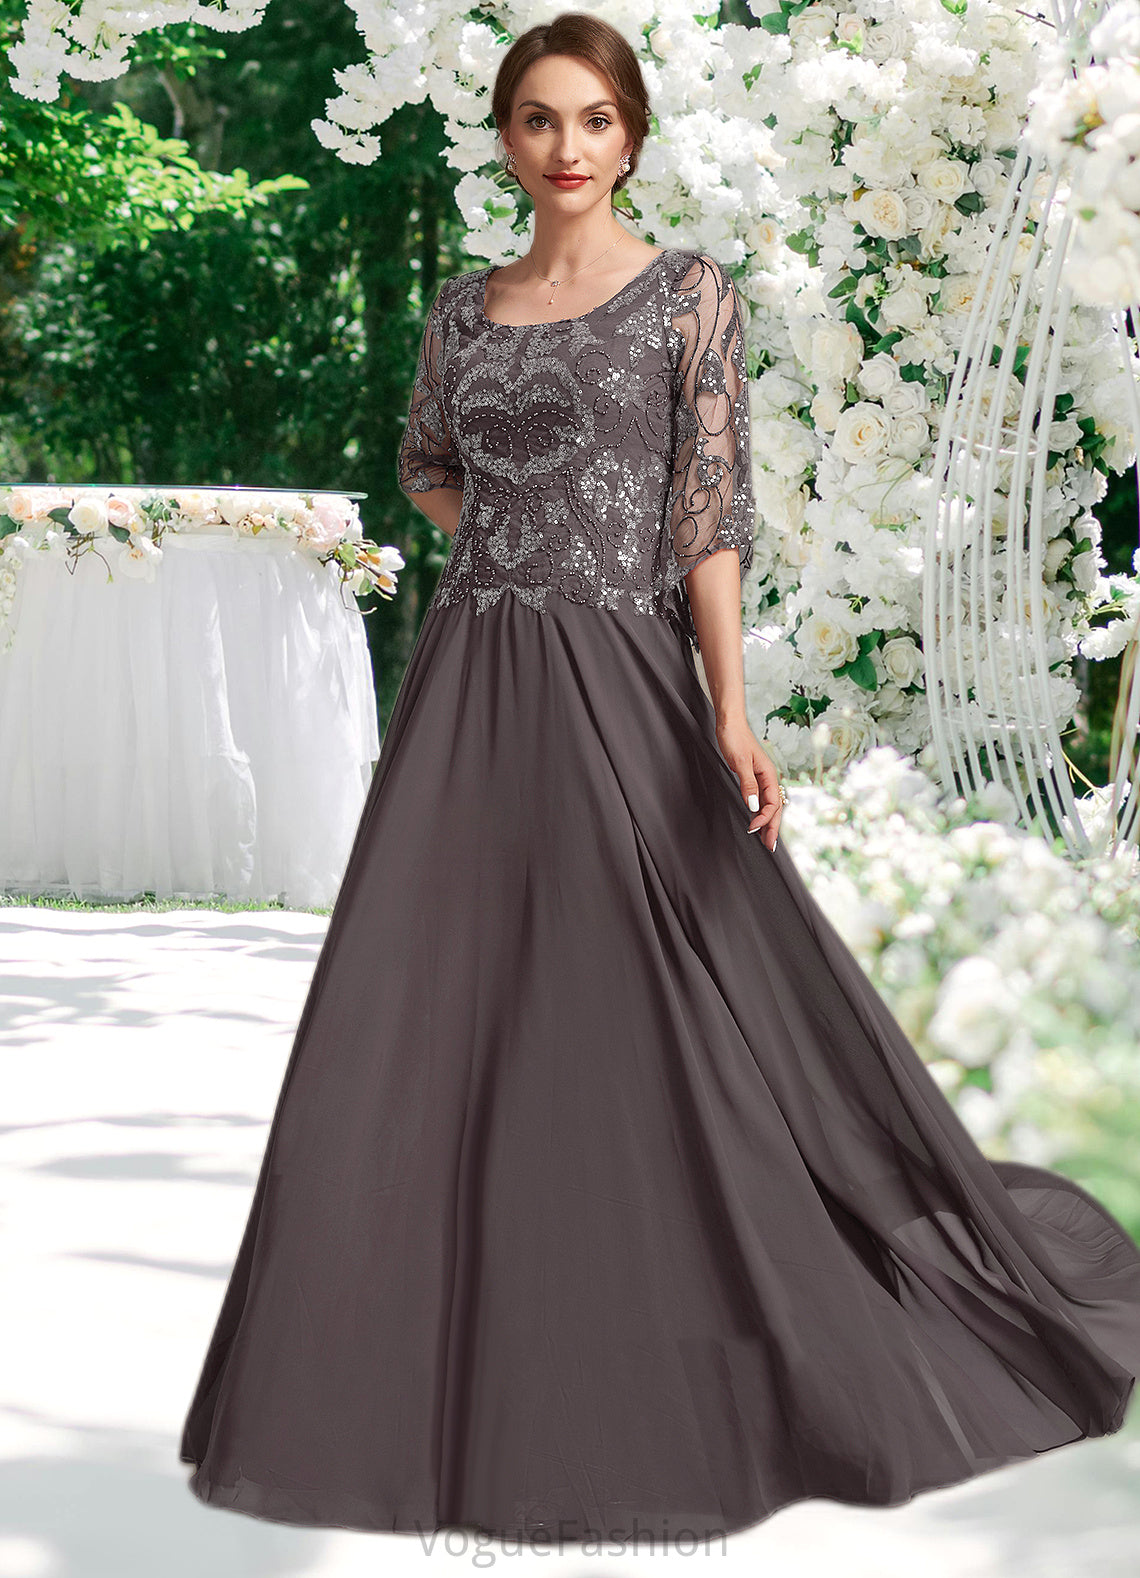 Olympia A-Line Scoop Neck Floor-Length Chiffon Lace Mother of the Bride Dress With Beading Sequins DK126P0015036